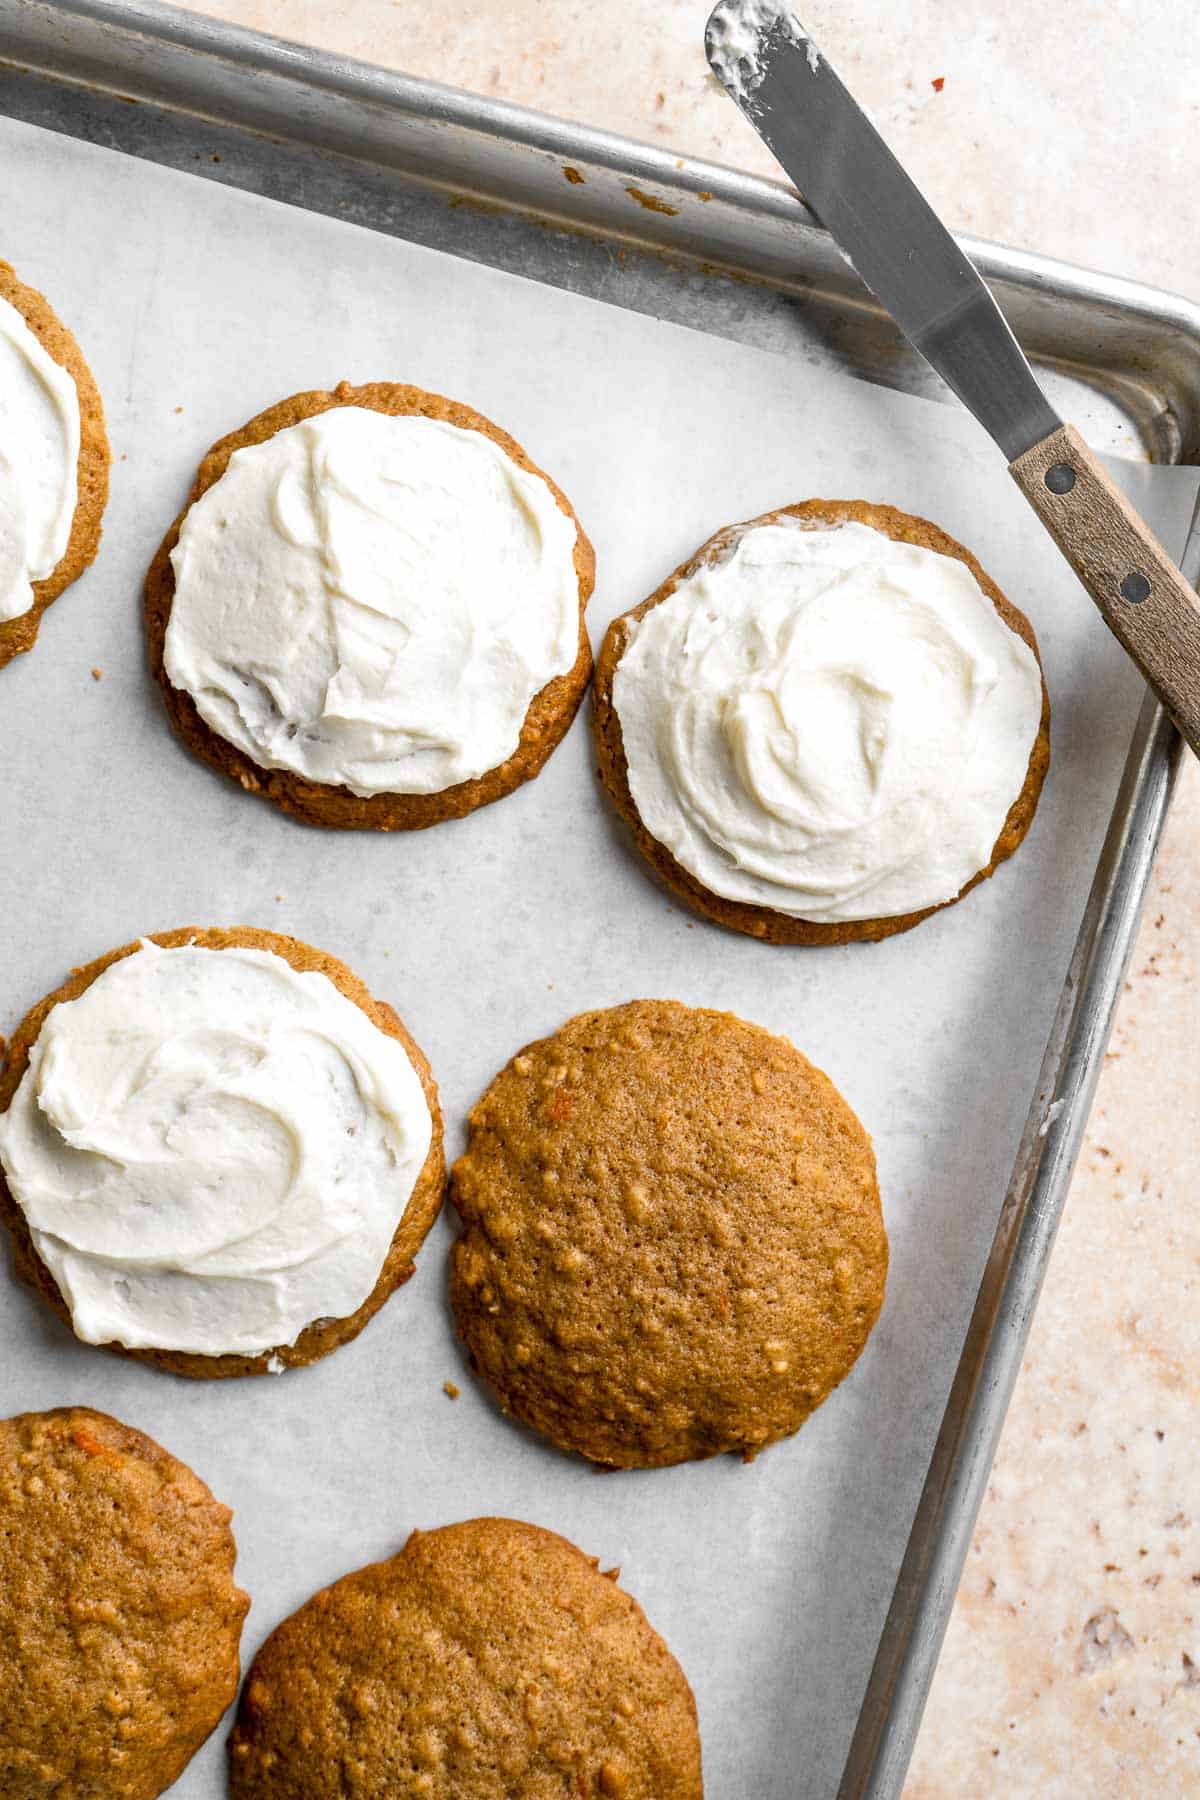 Carrot Cake Cookies are soft, chewy, cake-like cookies with a delicious homemade cream cheese glaze. They taste just like carrot cake but in cookie form. | aheadofthyme.com